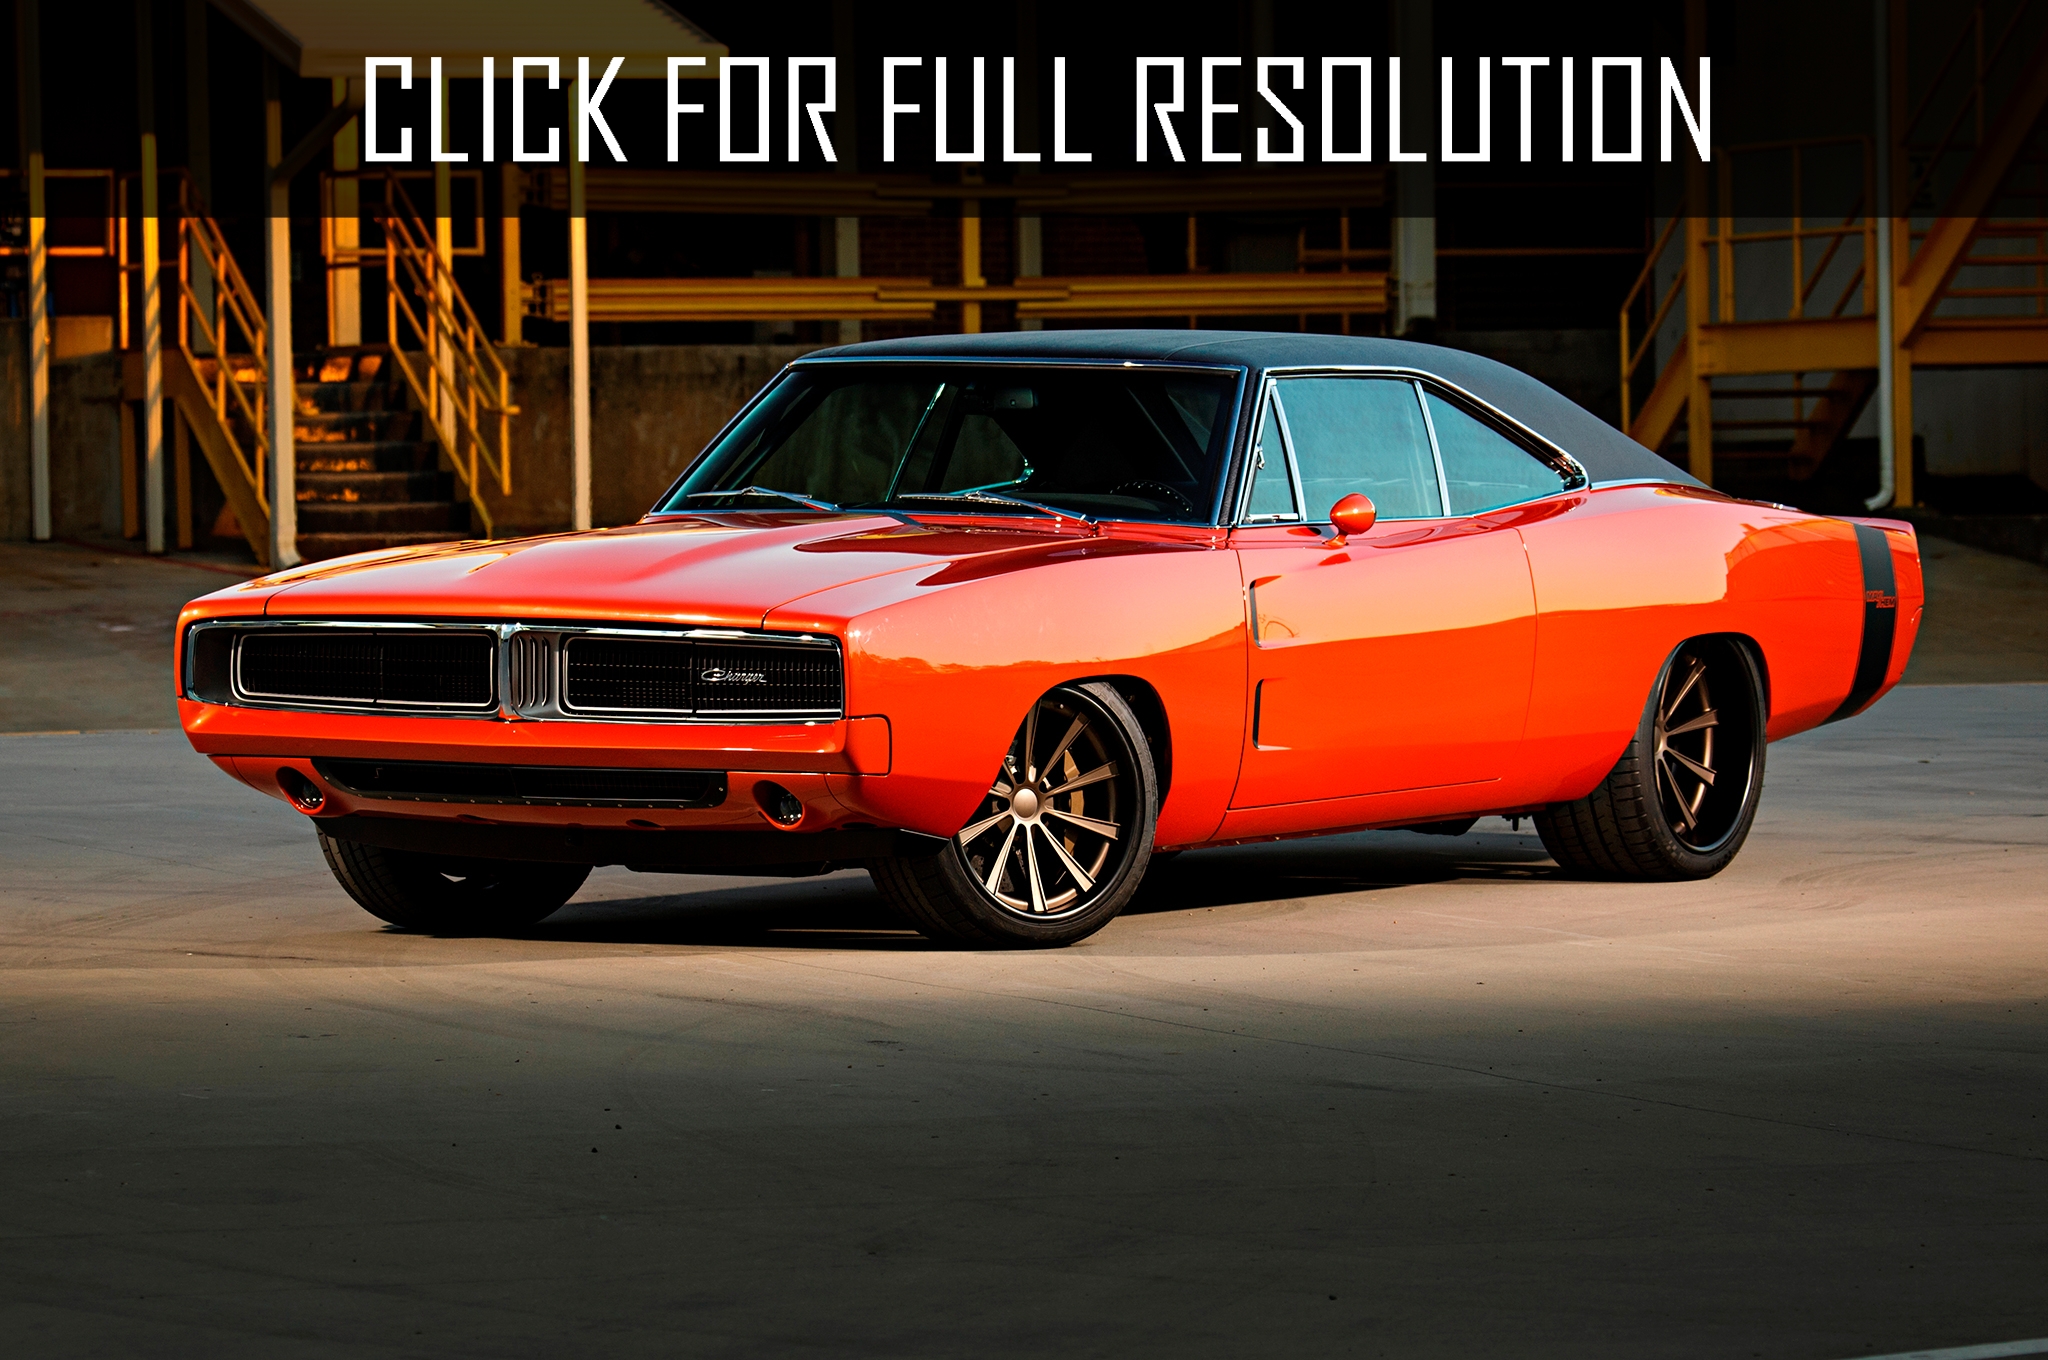 1969 Dodge Charger Best Image Gallery 811 Share And Download